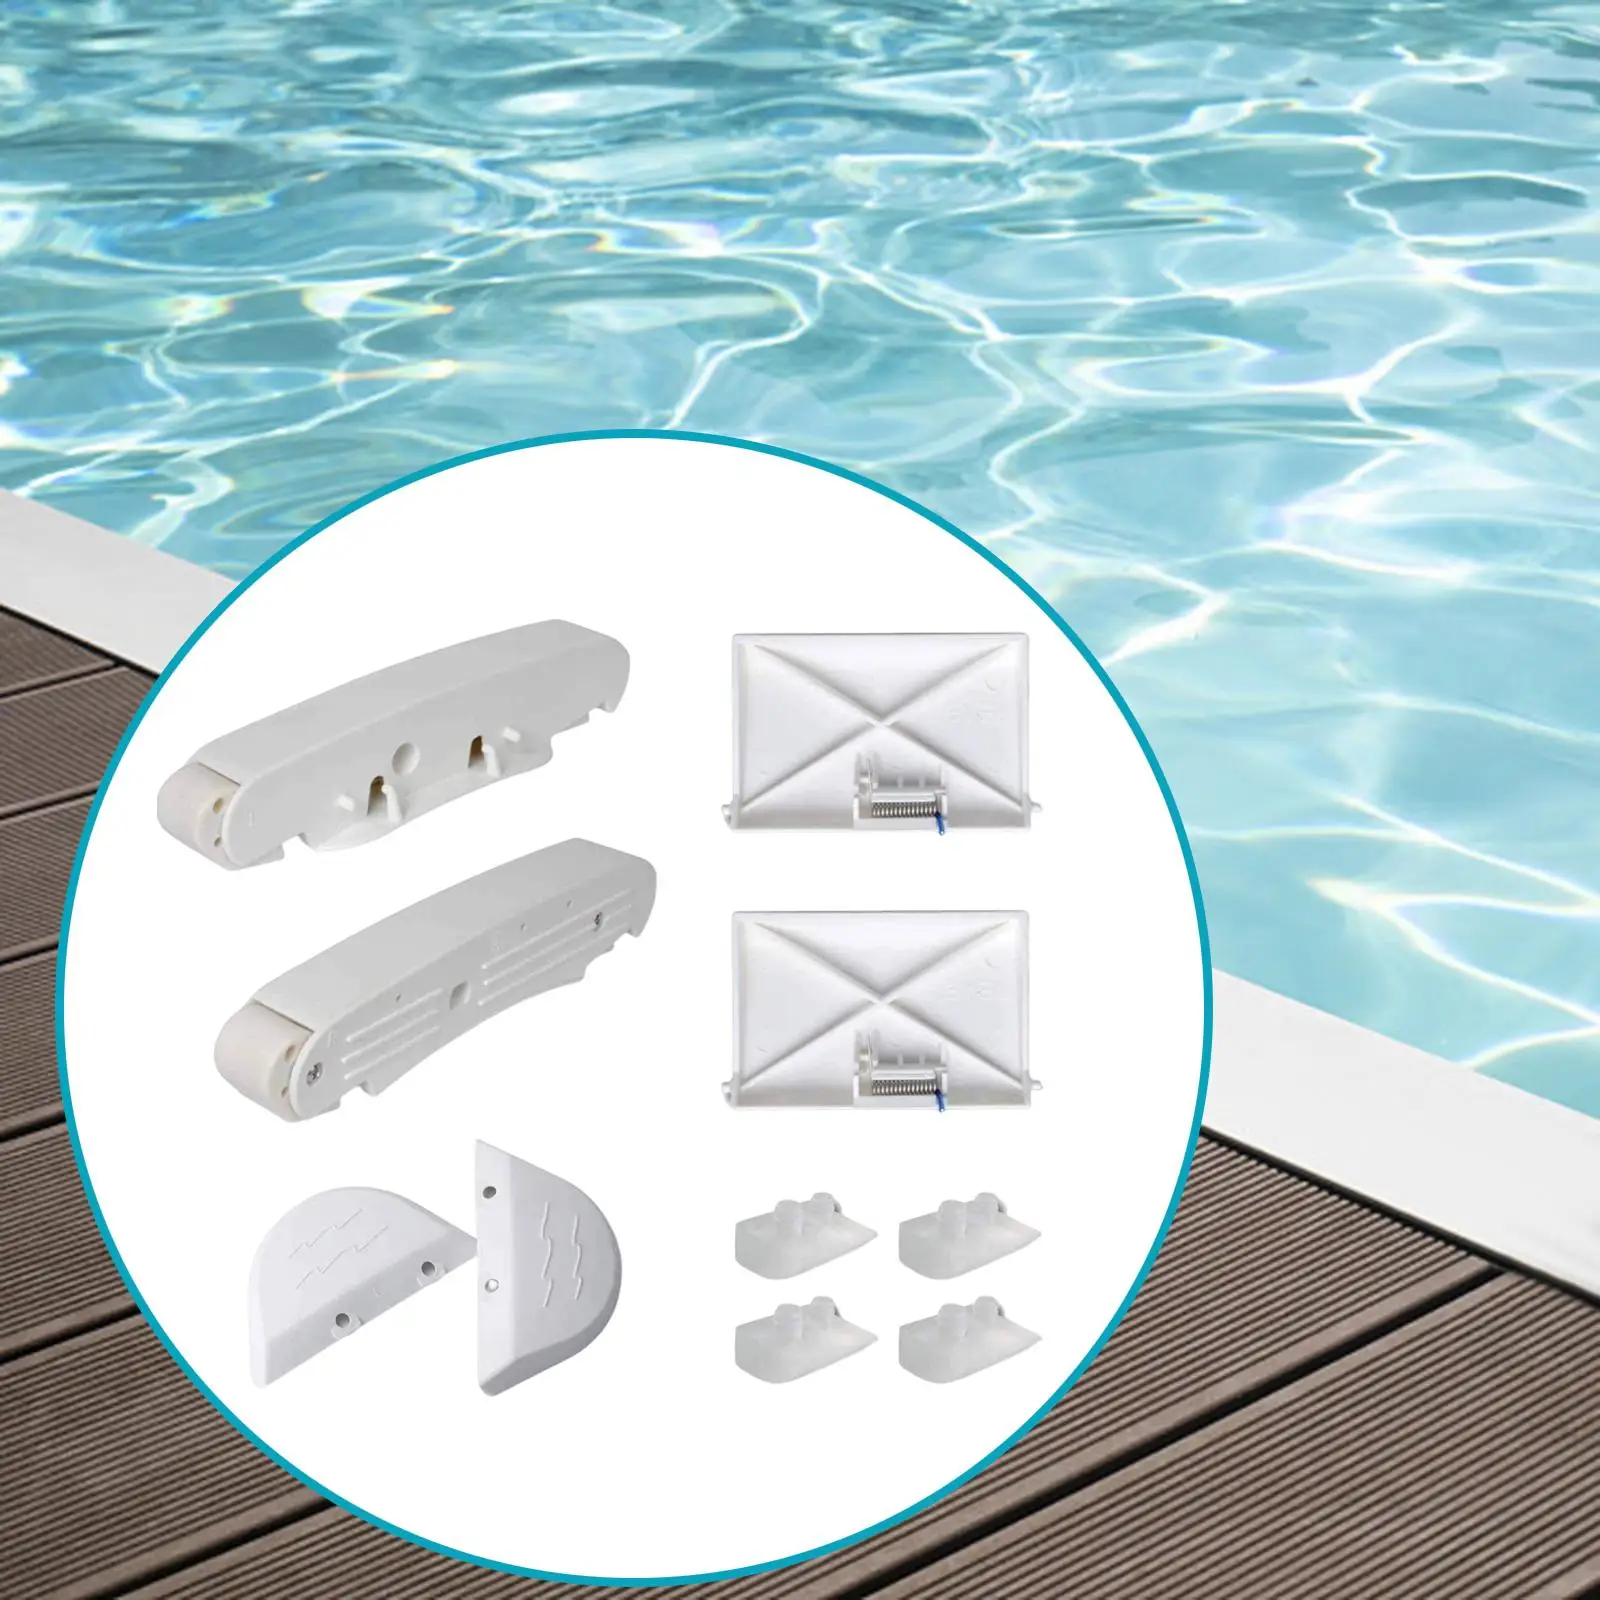 10Pcs Pool Cleaner Pod Swing Set Indoor Lightweight Pool Cleaning Equipment